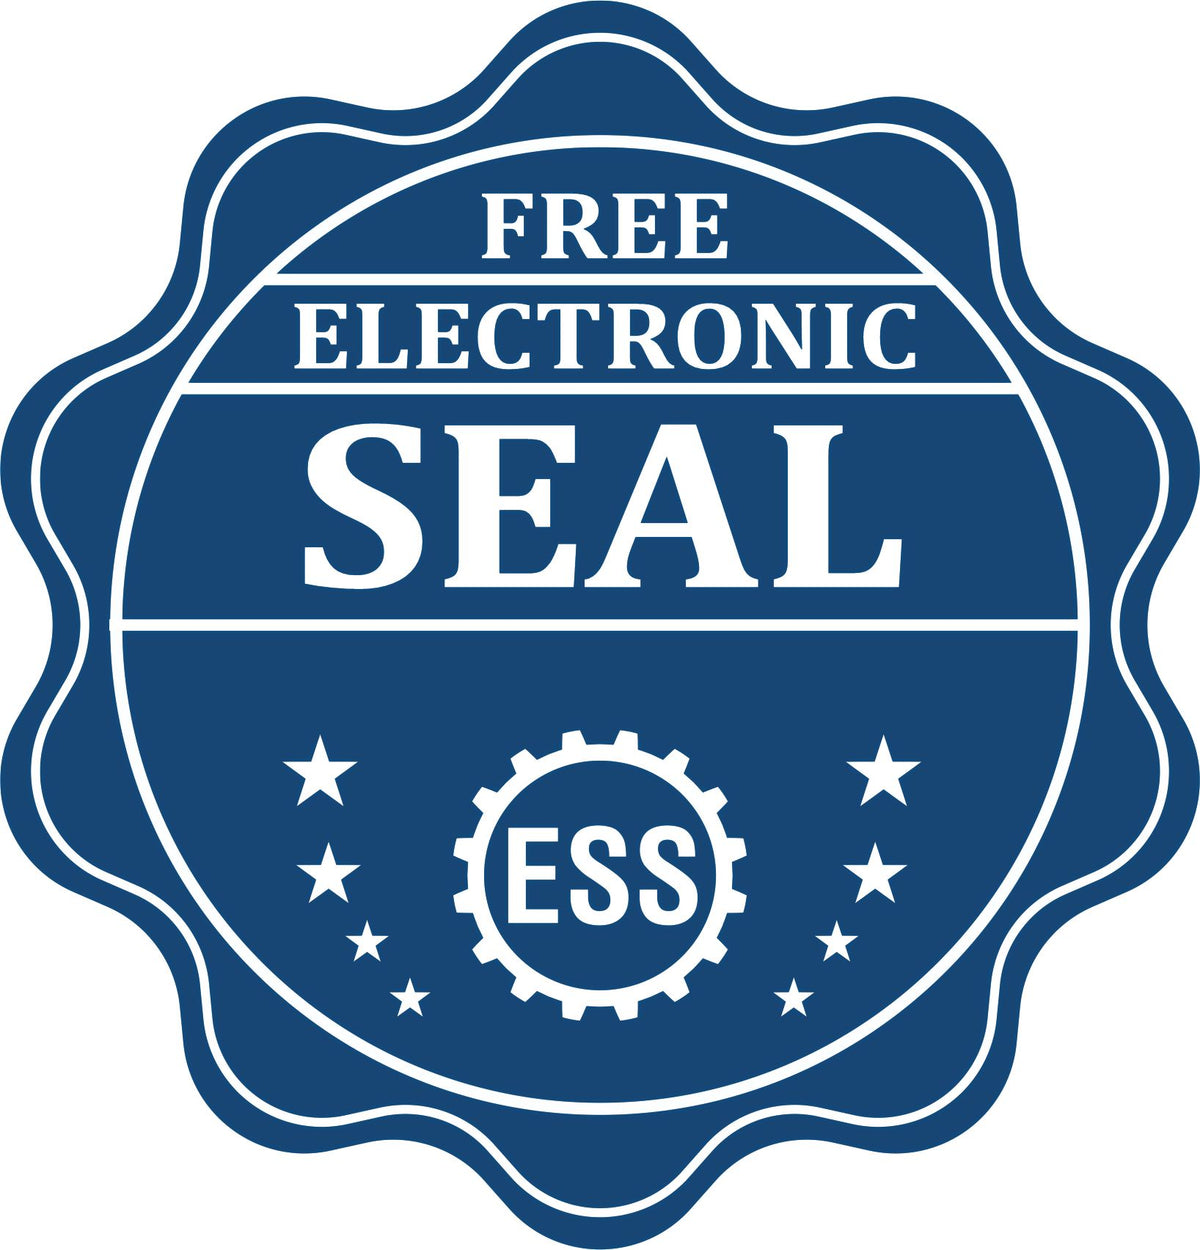 A badge showing a free electronic seal for the Long Reach Idaho Geology Seal with stars and the ESS gear on the emblem.